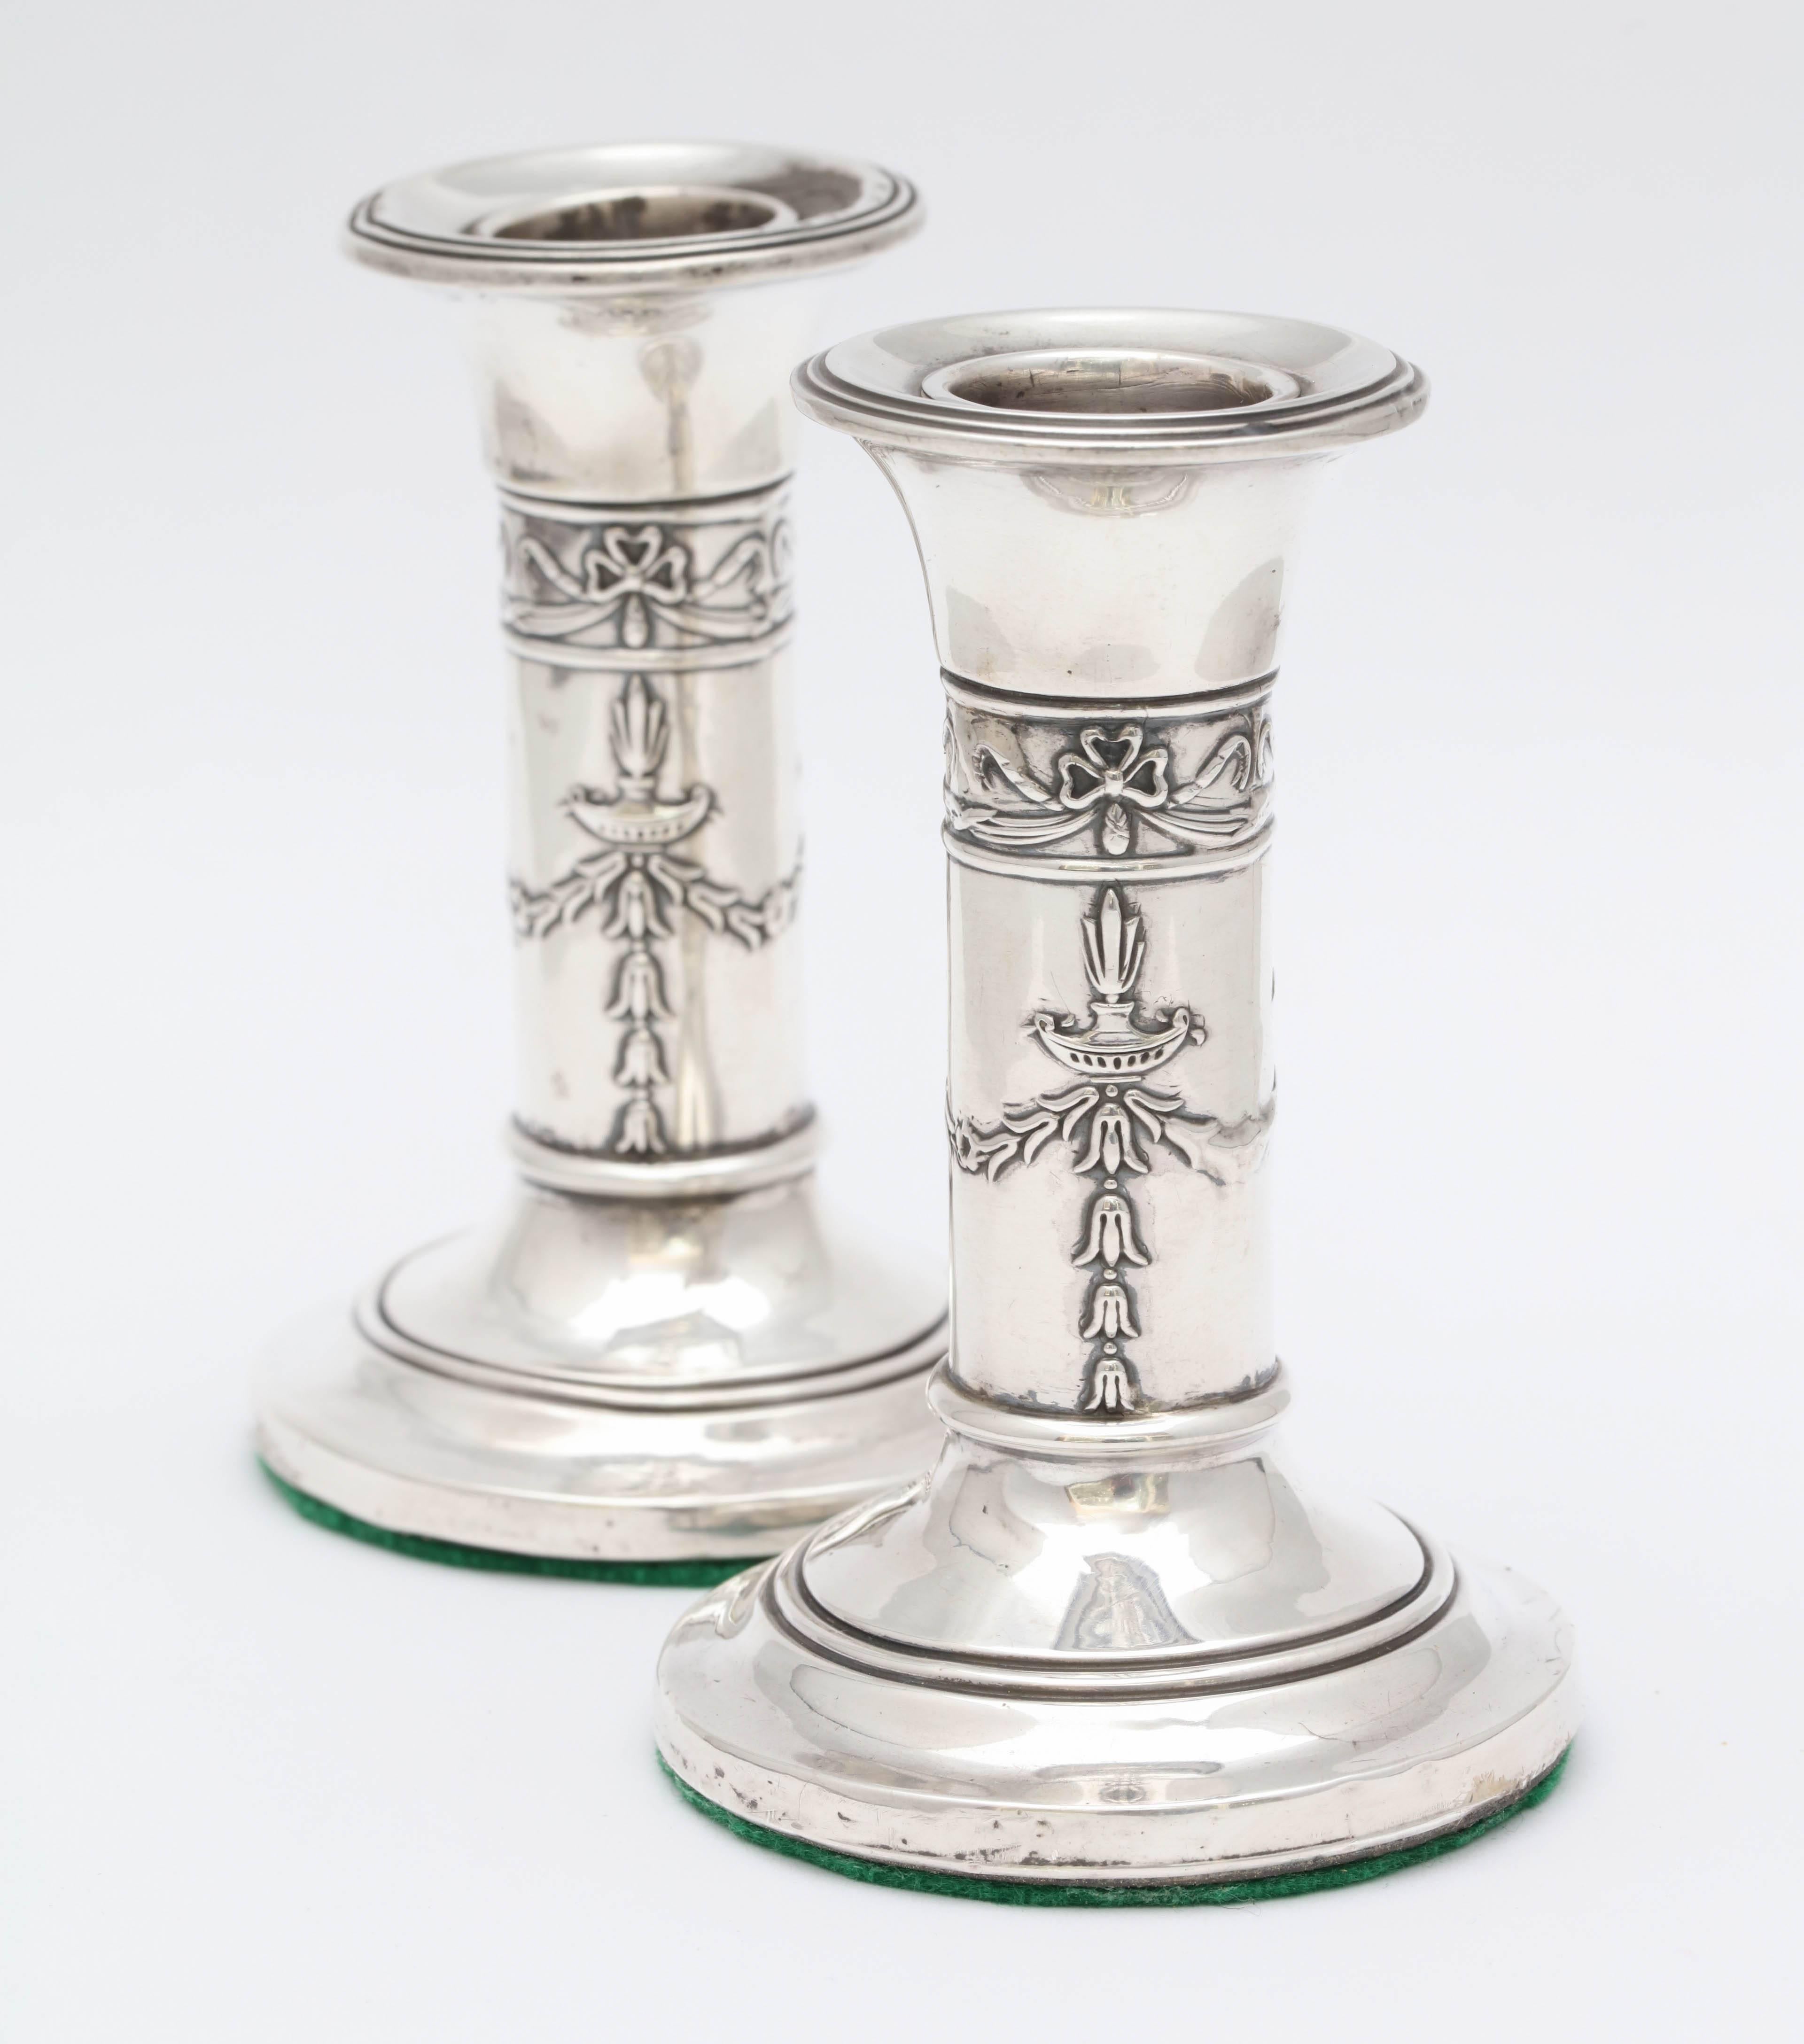 Lovely, small pair of Edwardian, sterling silver candlesticks, Birmingham, England, 1906, Levi and Salaman - makers. Pretty design on columns. 4 inches high x 2 1/2 inches diameter across base of each. Weighted. Both have some minor dints (see